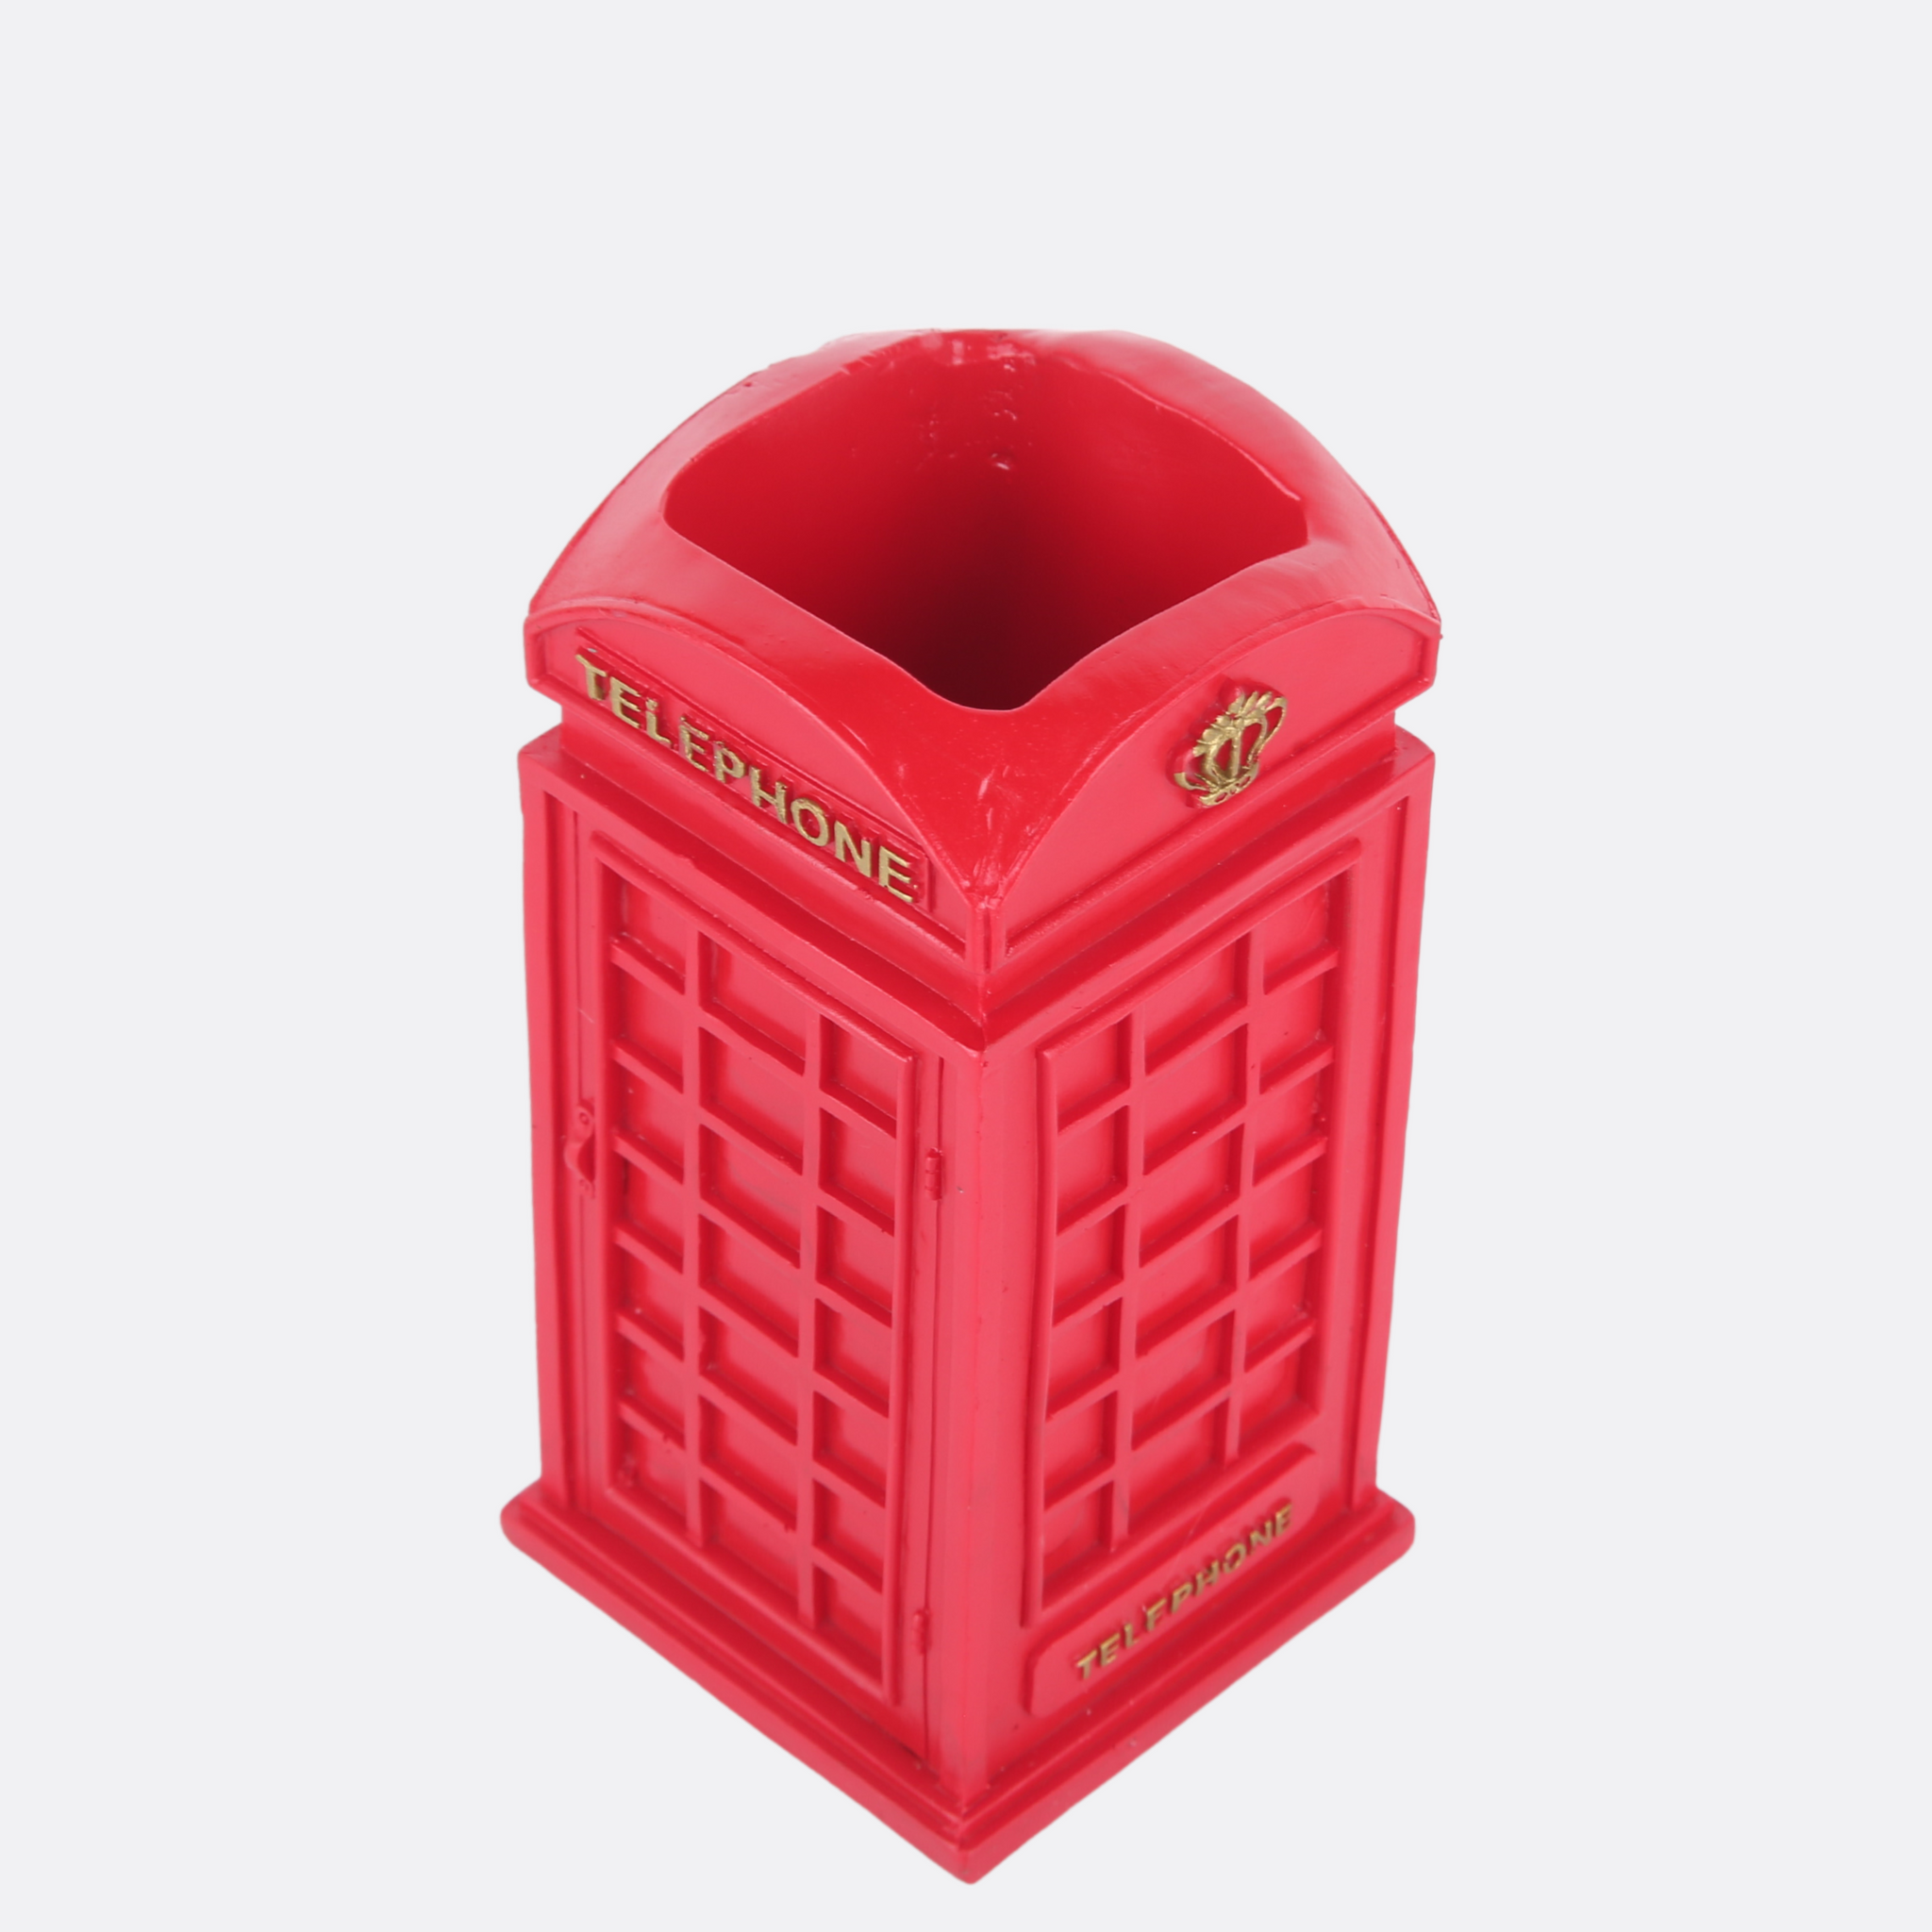 Phone Booth Pen Holder ( Two Colors )